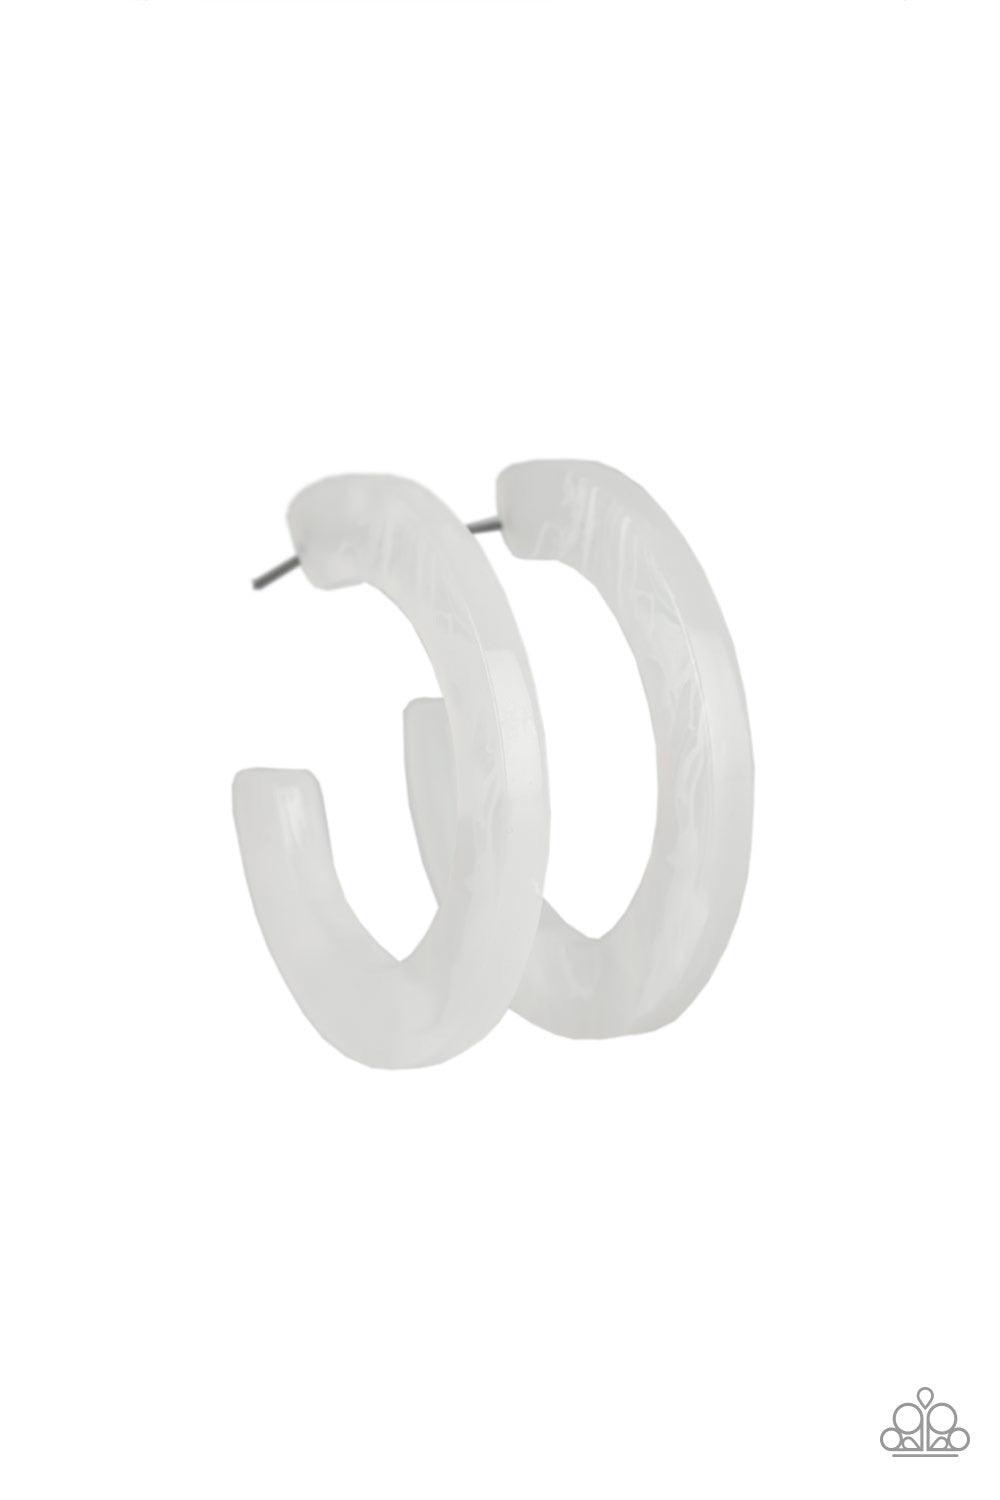 Paparazzi Accessories Oceanside Oasis - White Featuring a smoky white finish, an opaque hoop curls around the ear for a colorfully retro look. Earring attaches to a standard post fitting. Hoop measures 1 3/4" in diameter.